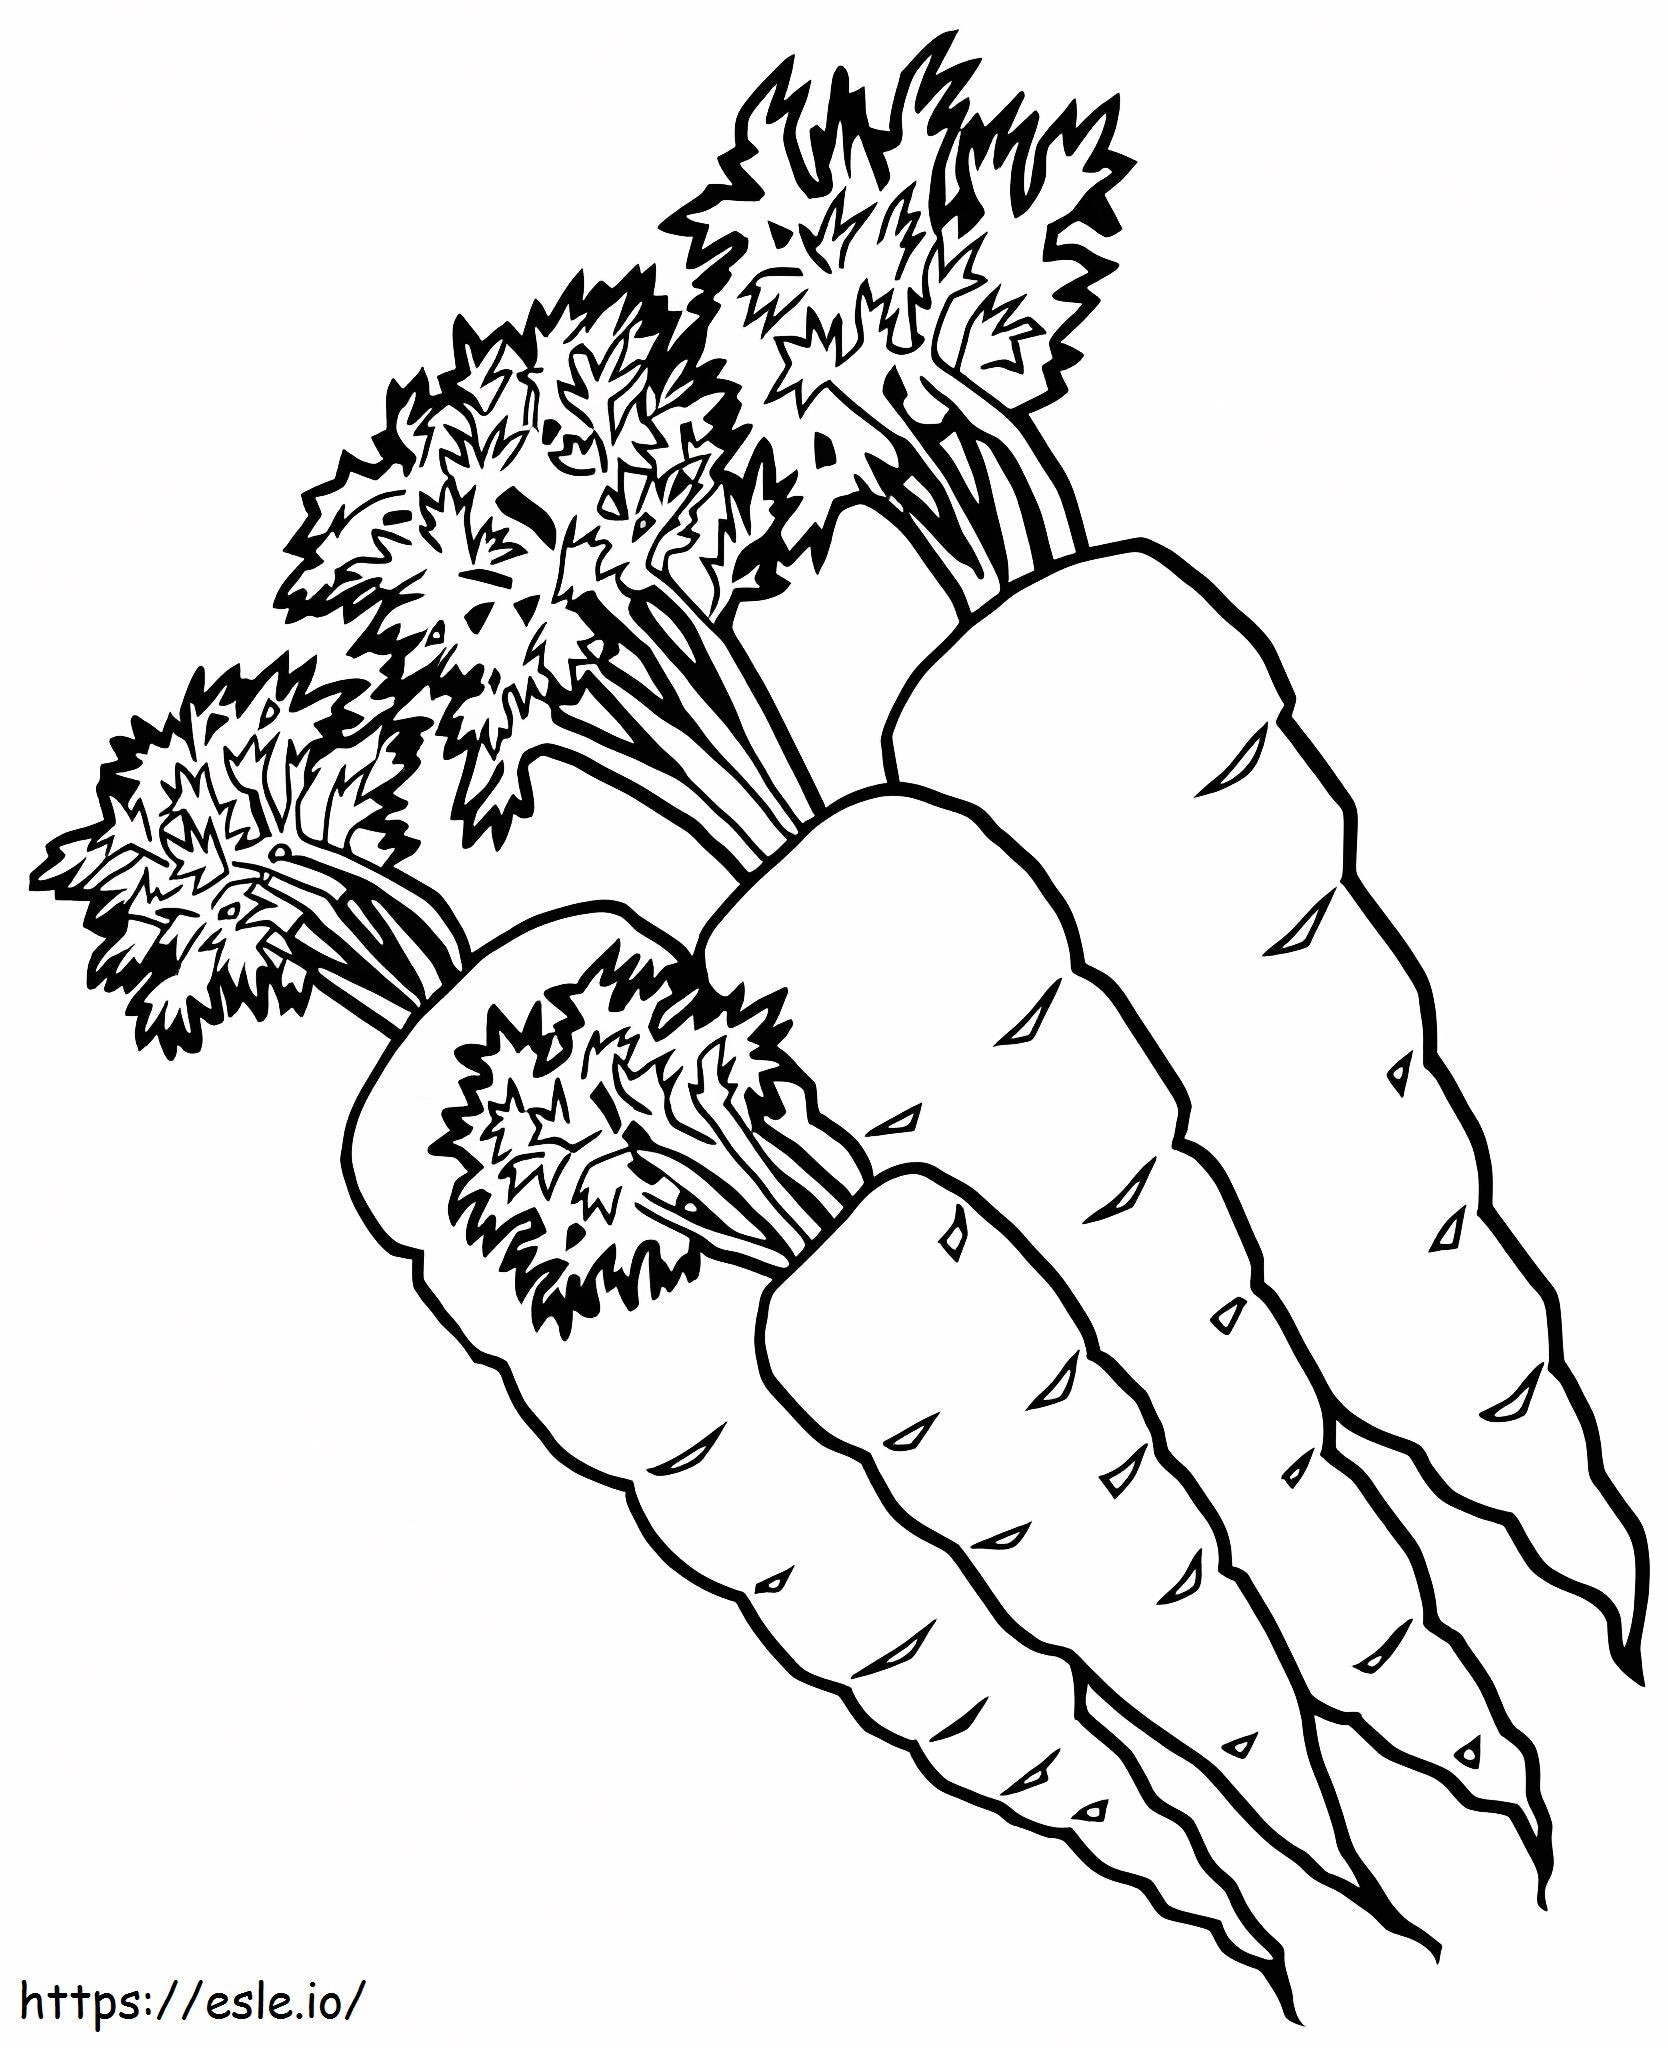 Four Carrots coloring page